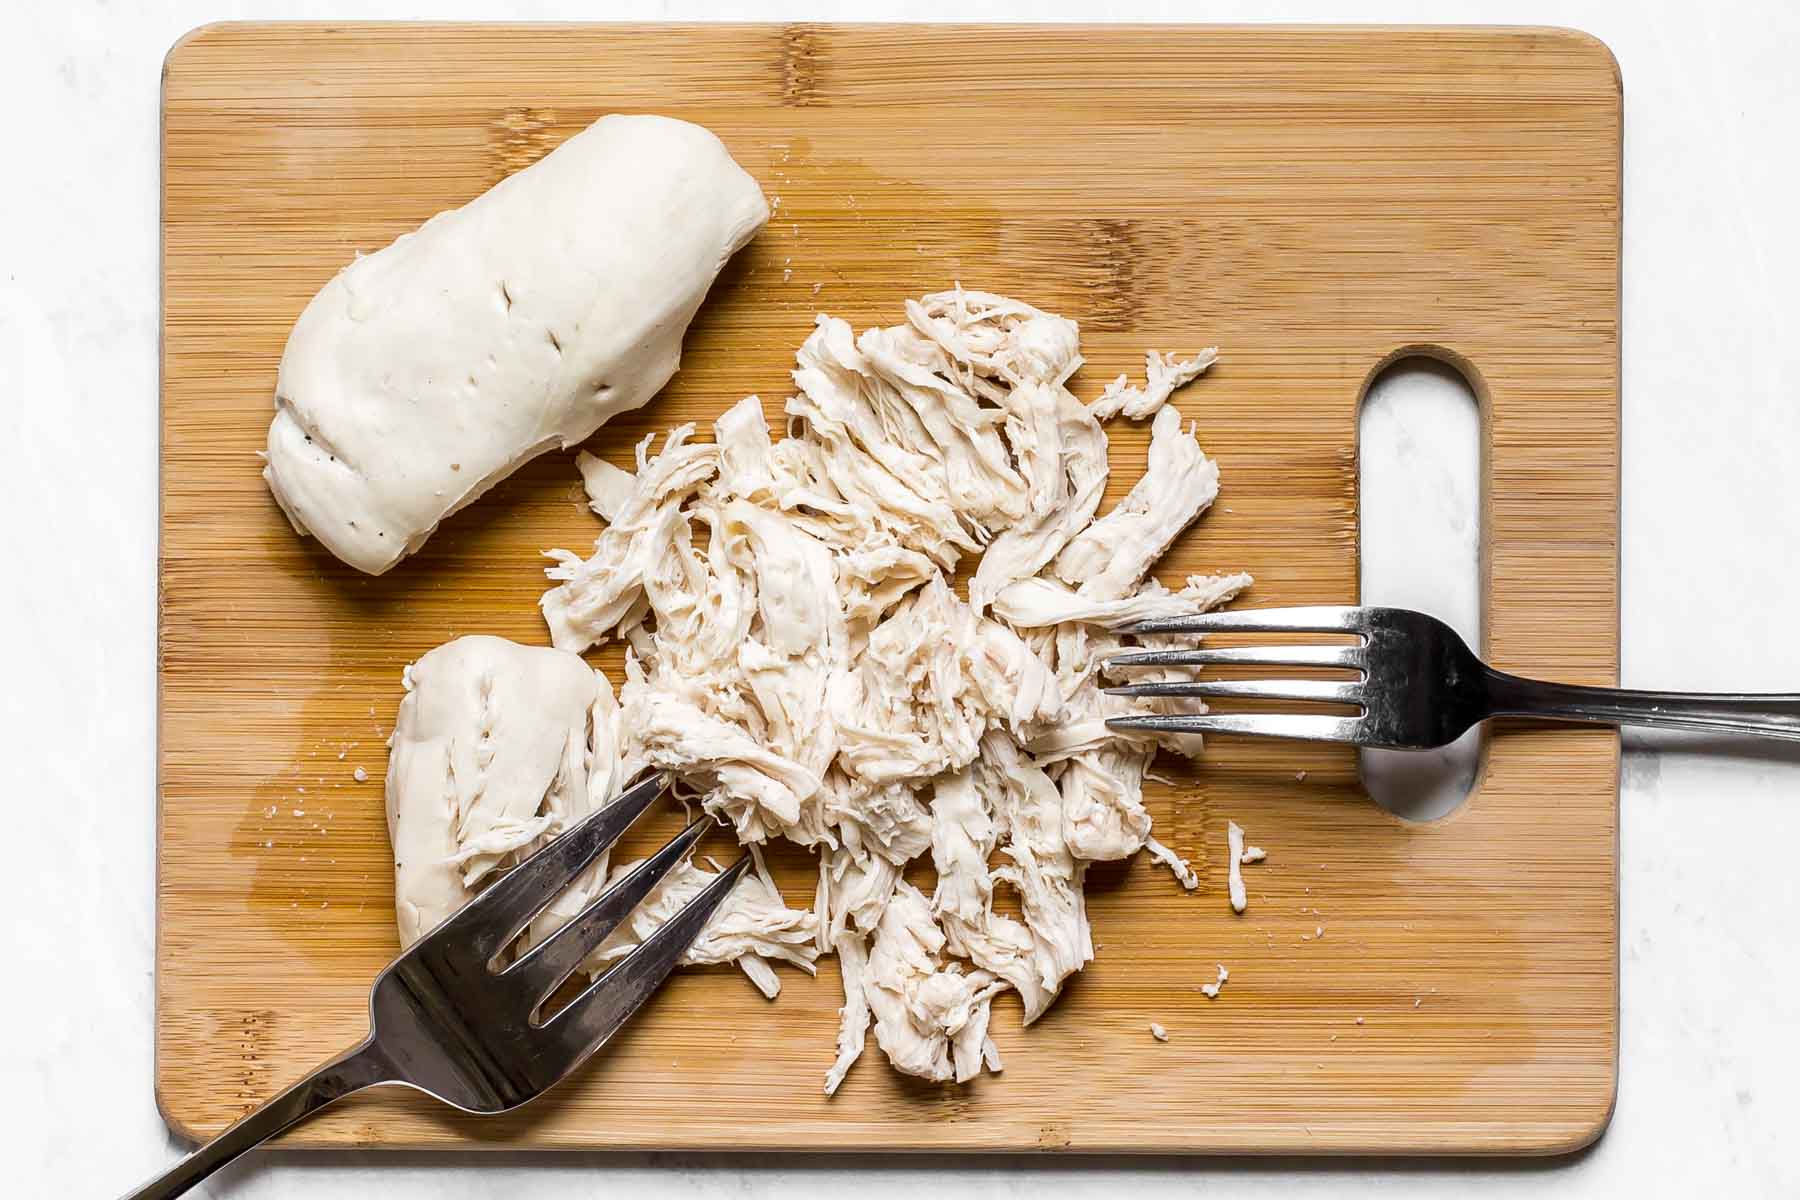 Shredded chicken on a wooden cutting board with two forks.